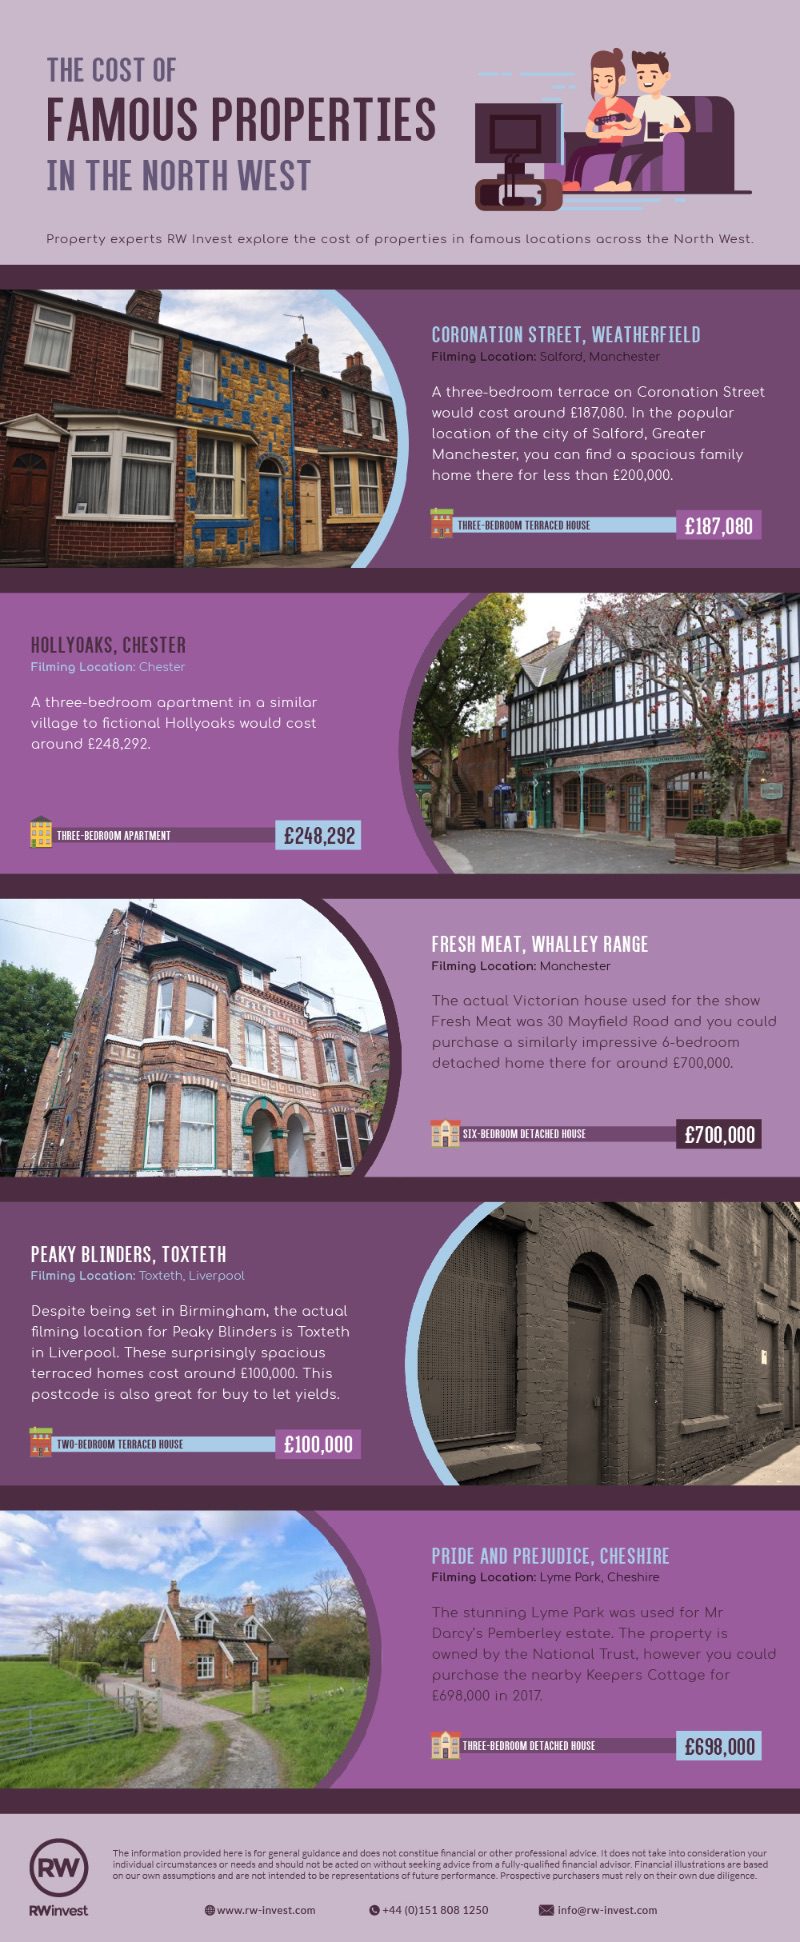 Cost of Famous Properties in the North West infographic